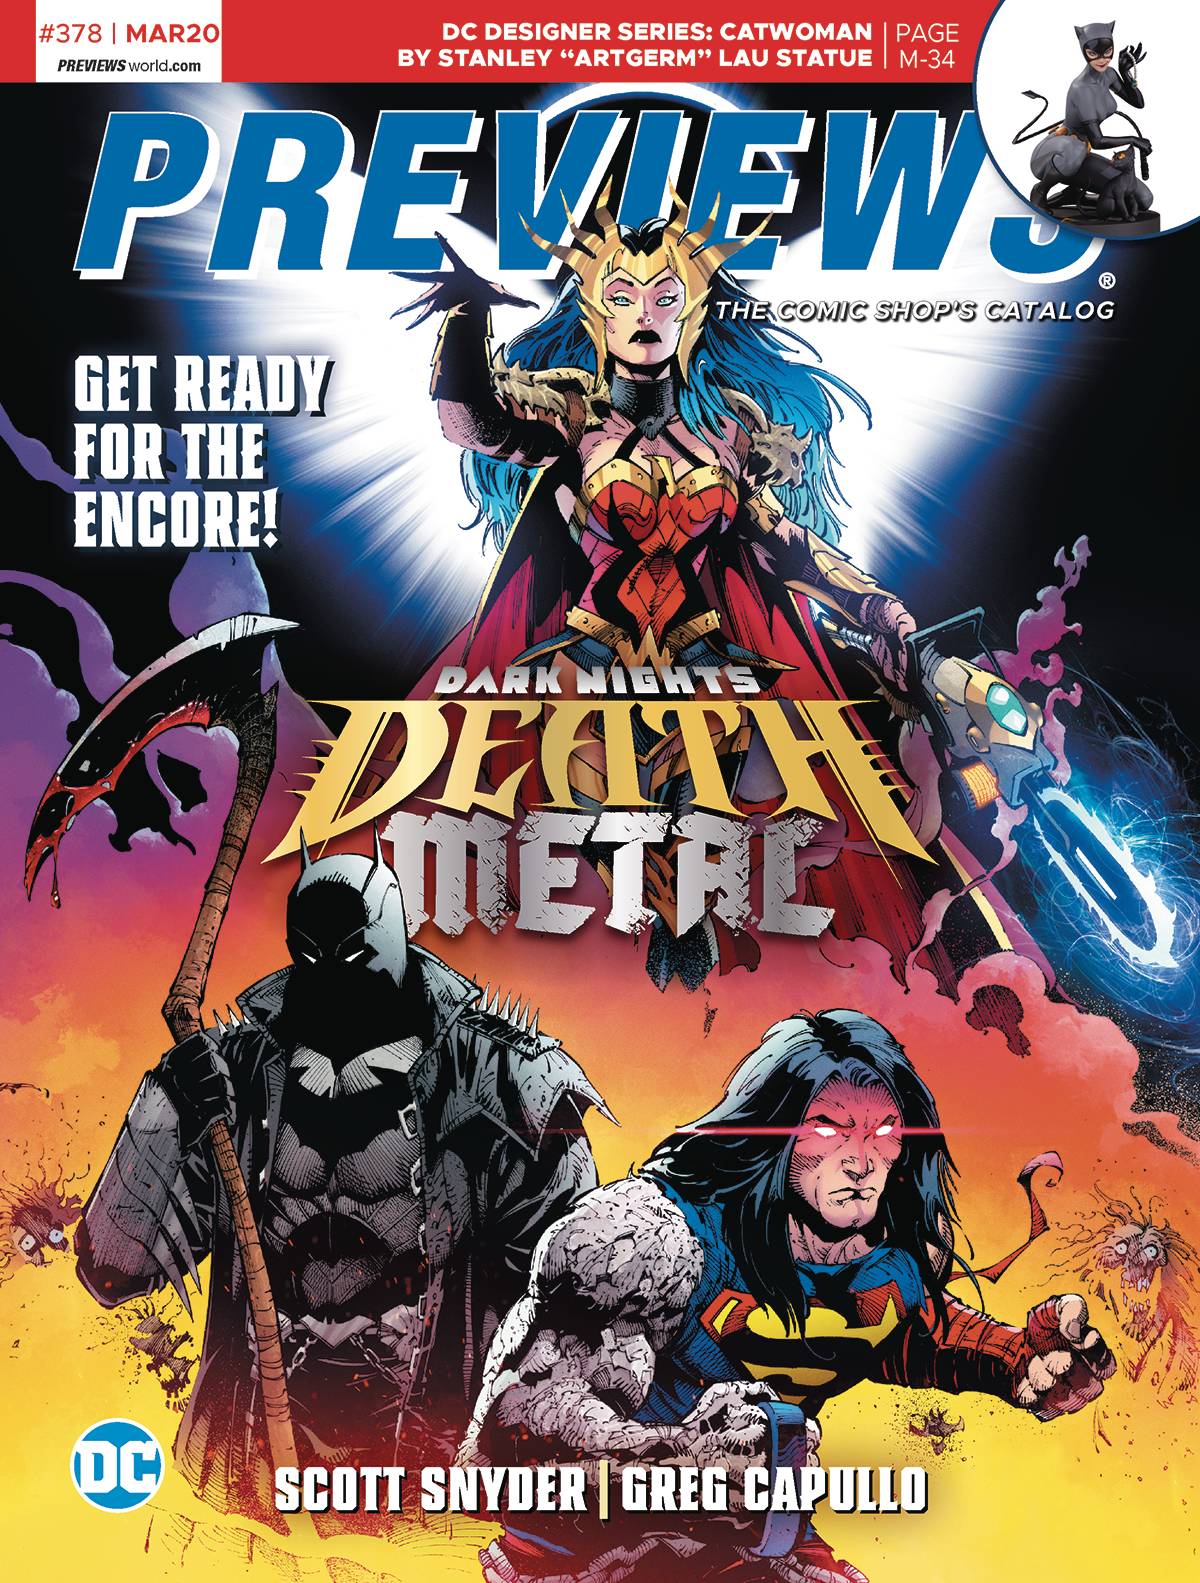 PREVIEWS #378 MARCH 2020